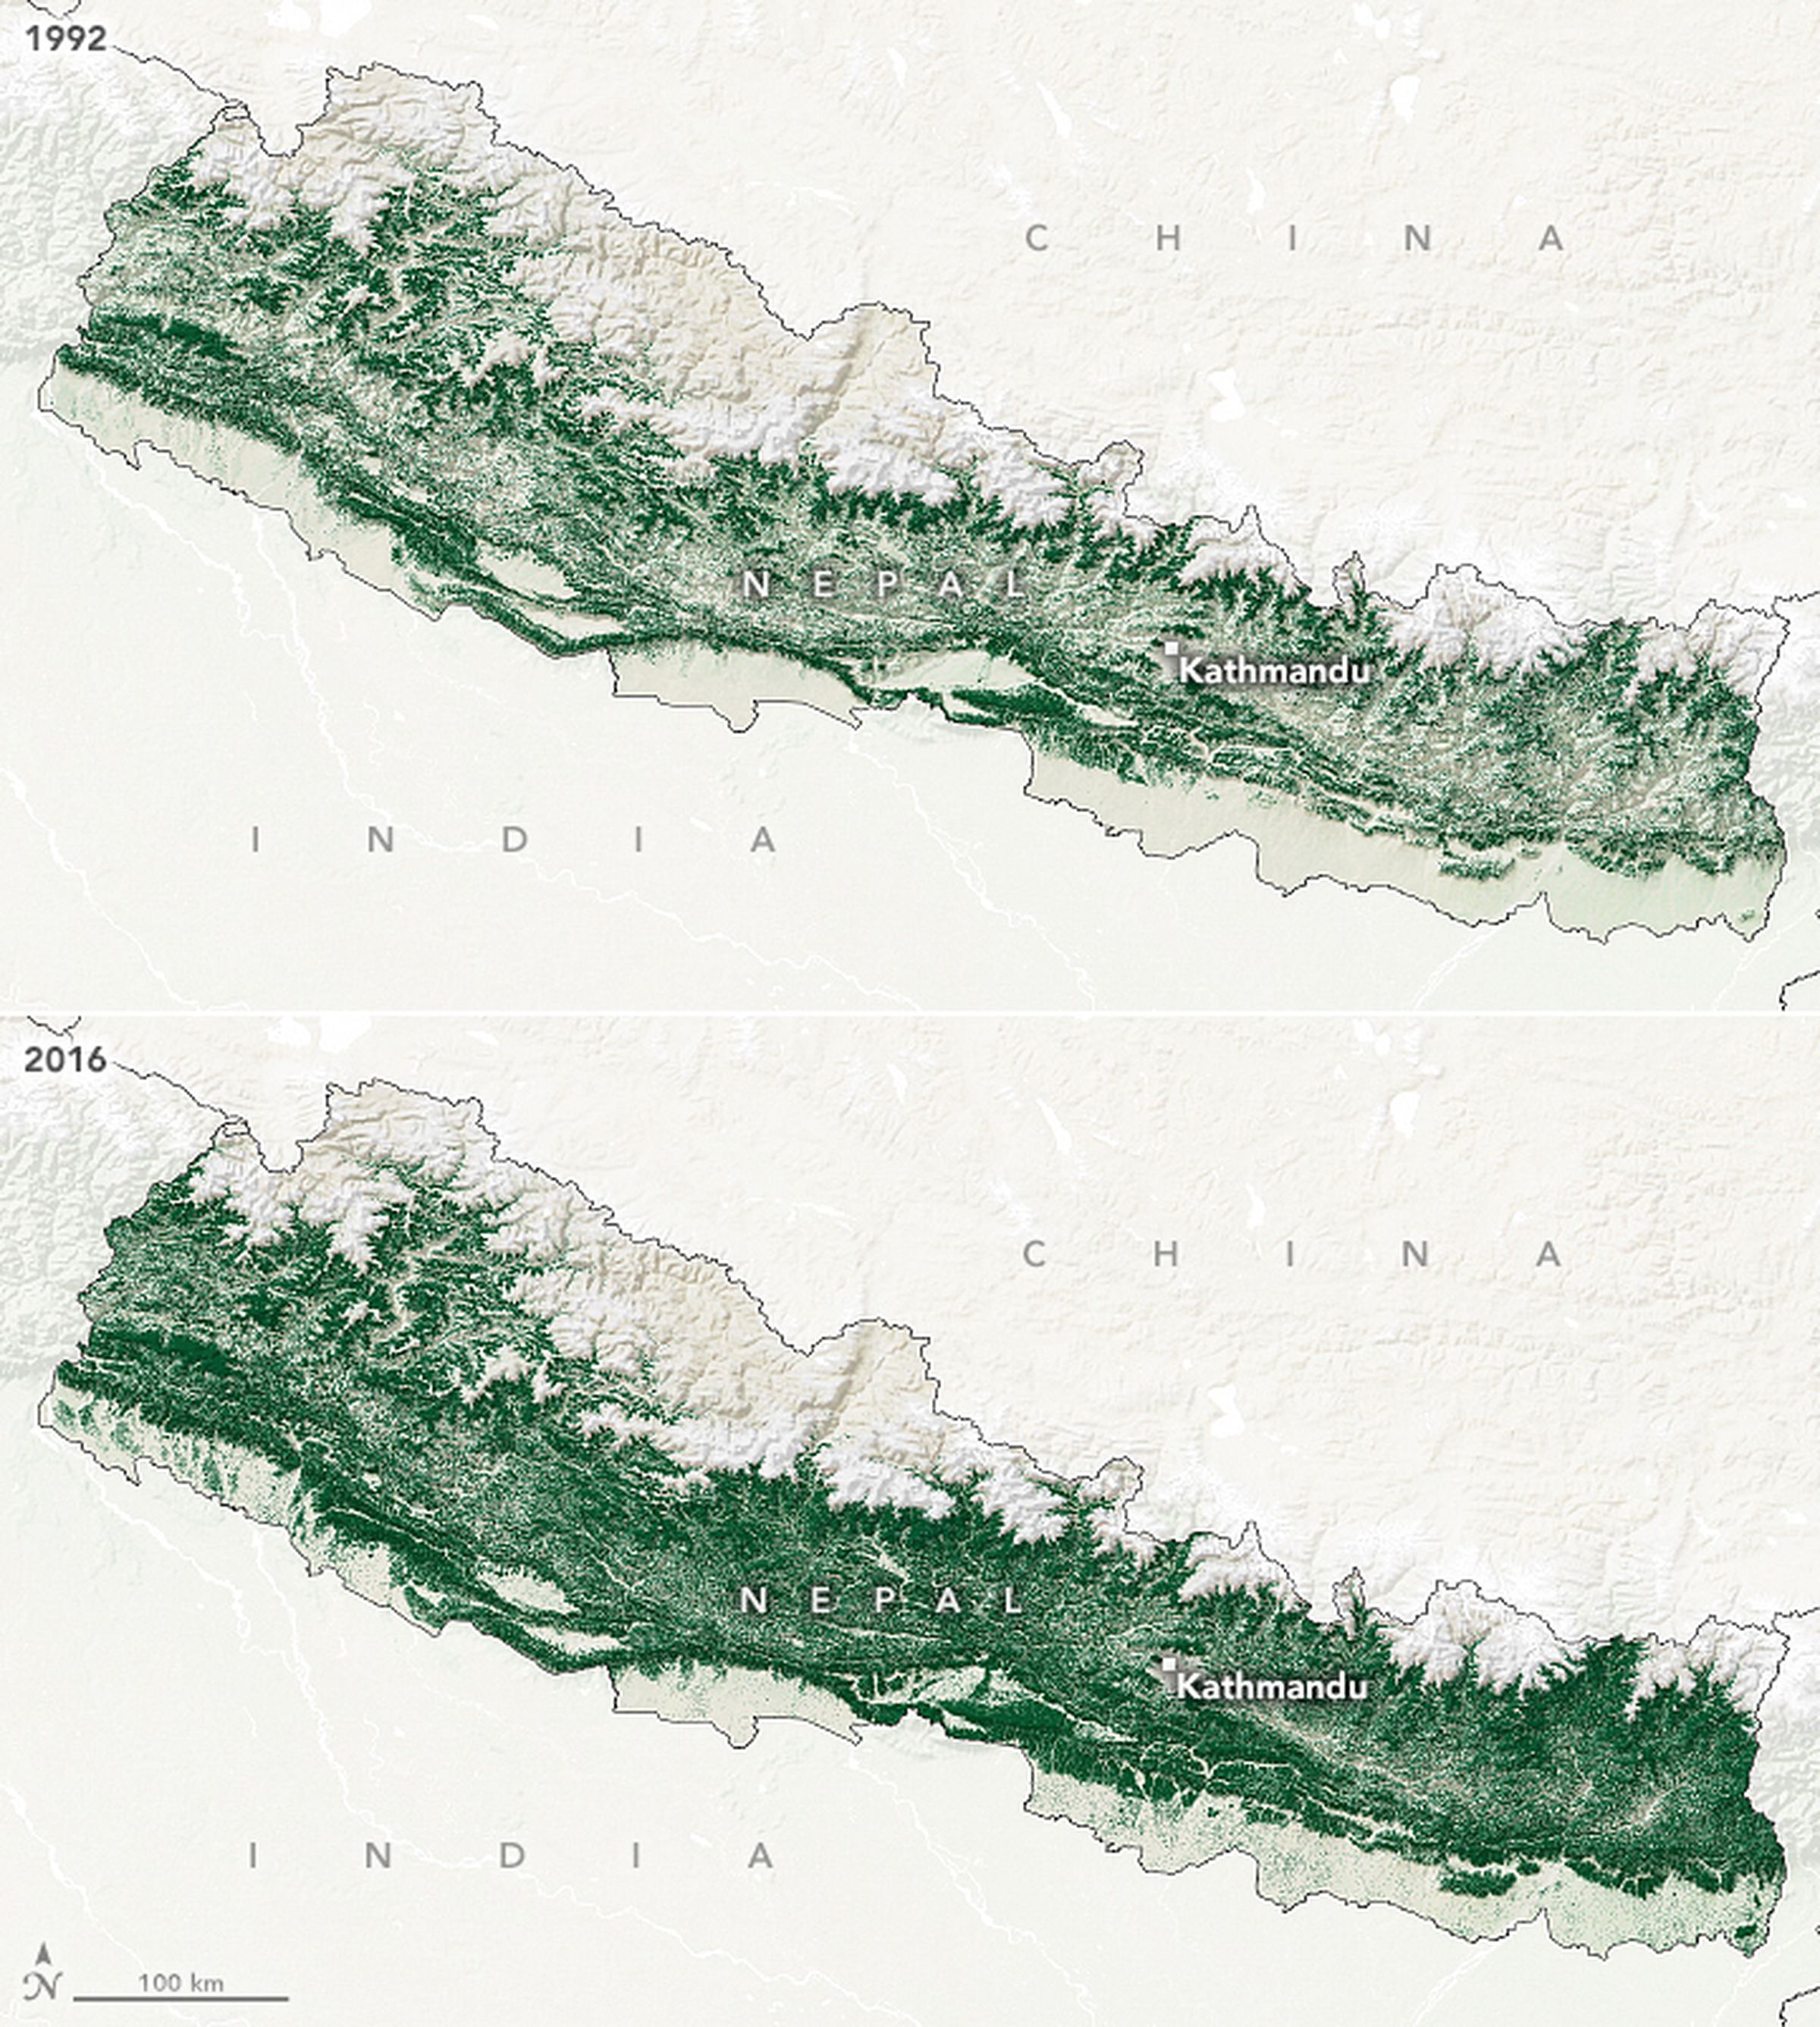 One map at the top shows Nepal shaded in light green, indicating little forest cover in 1992. A map below shows the country colored dark green, indicating increased forest cover in 2016.